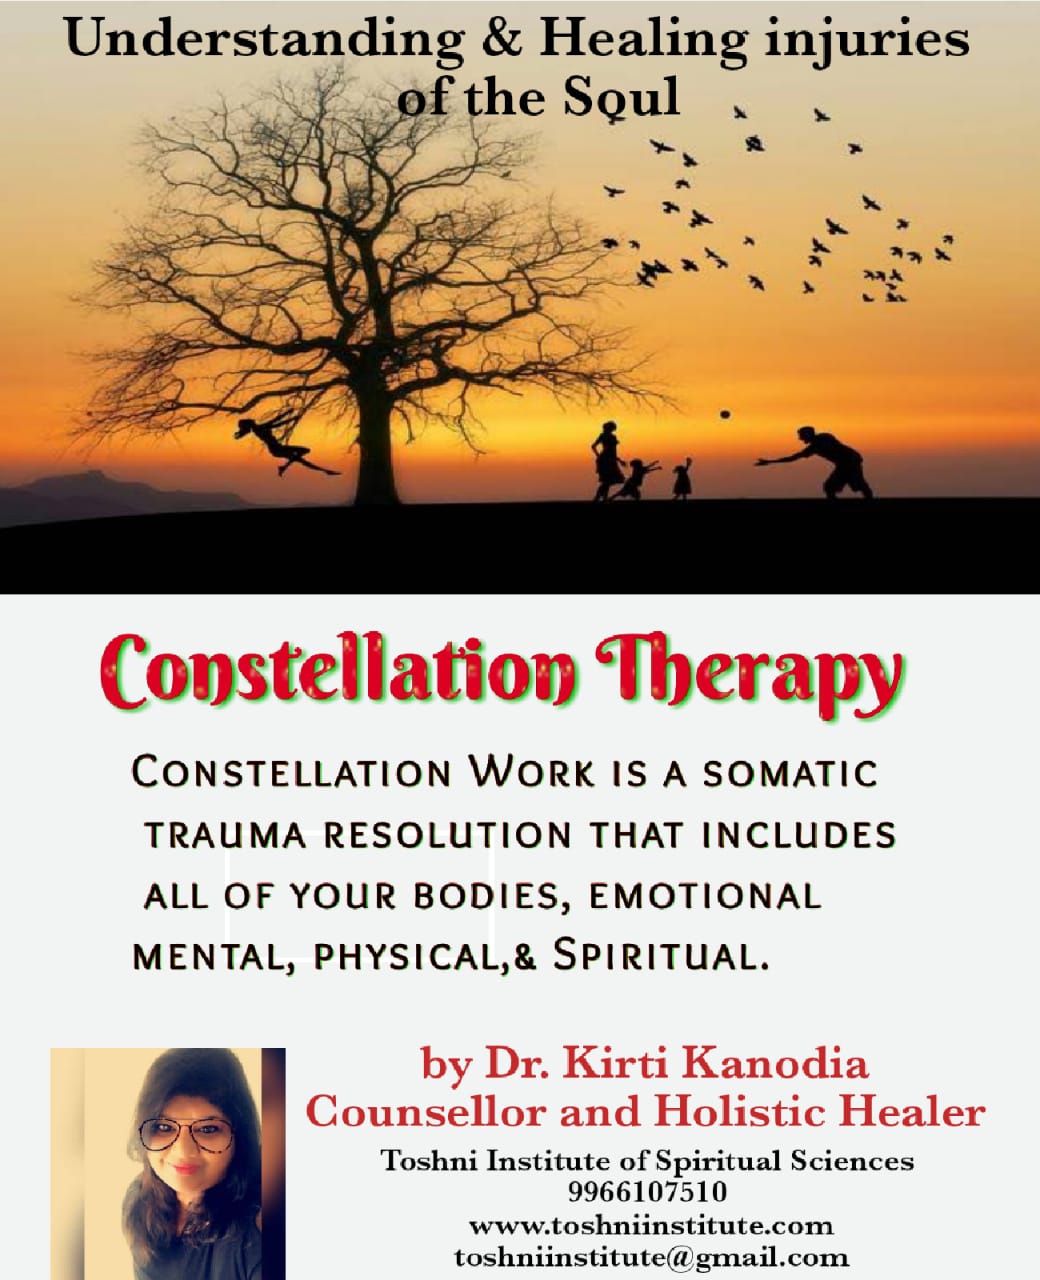 Family Constellations by Dr. Kirti Kanodia - Indore